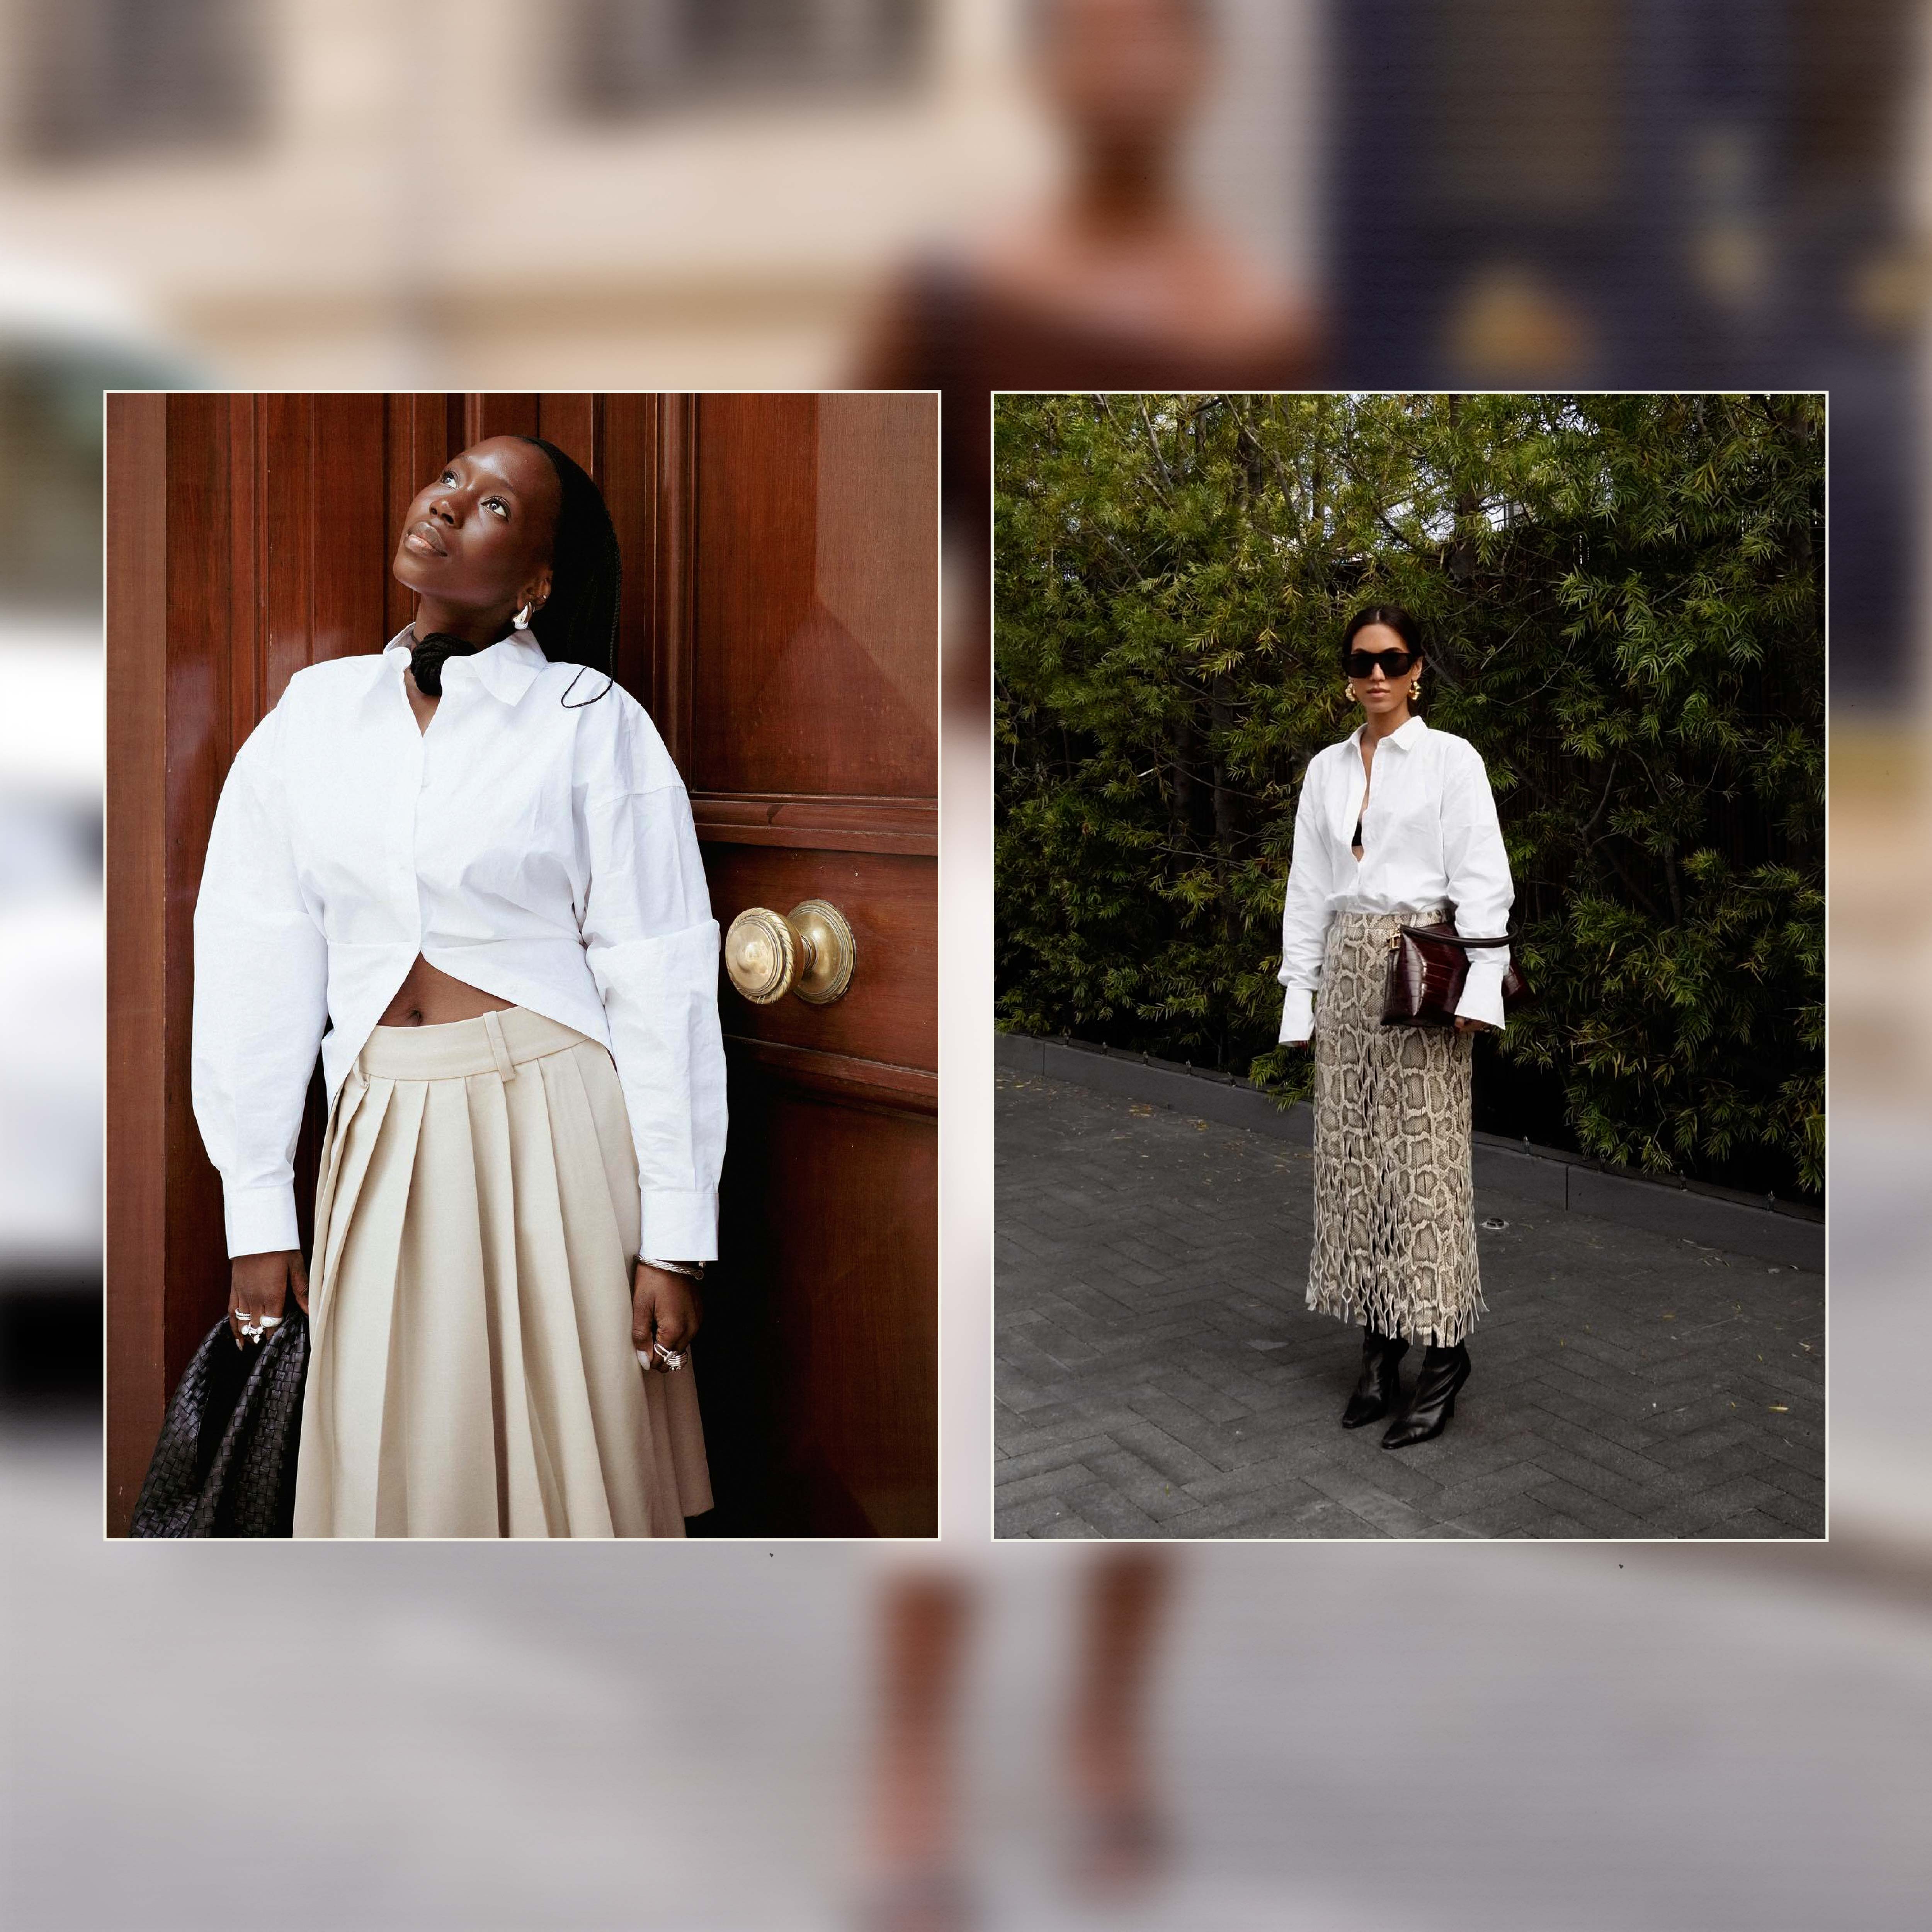 Best Midi Skirts: A True Classic No Closet Should Be Without